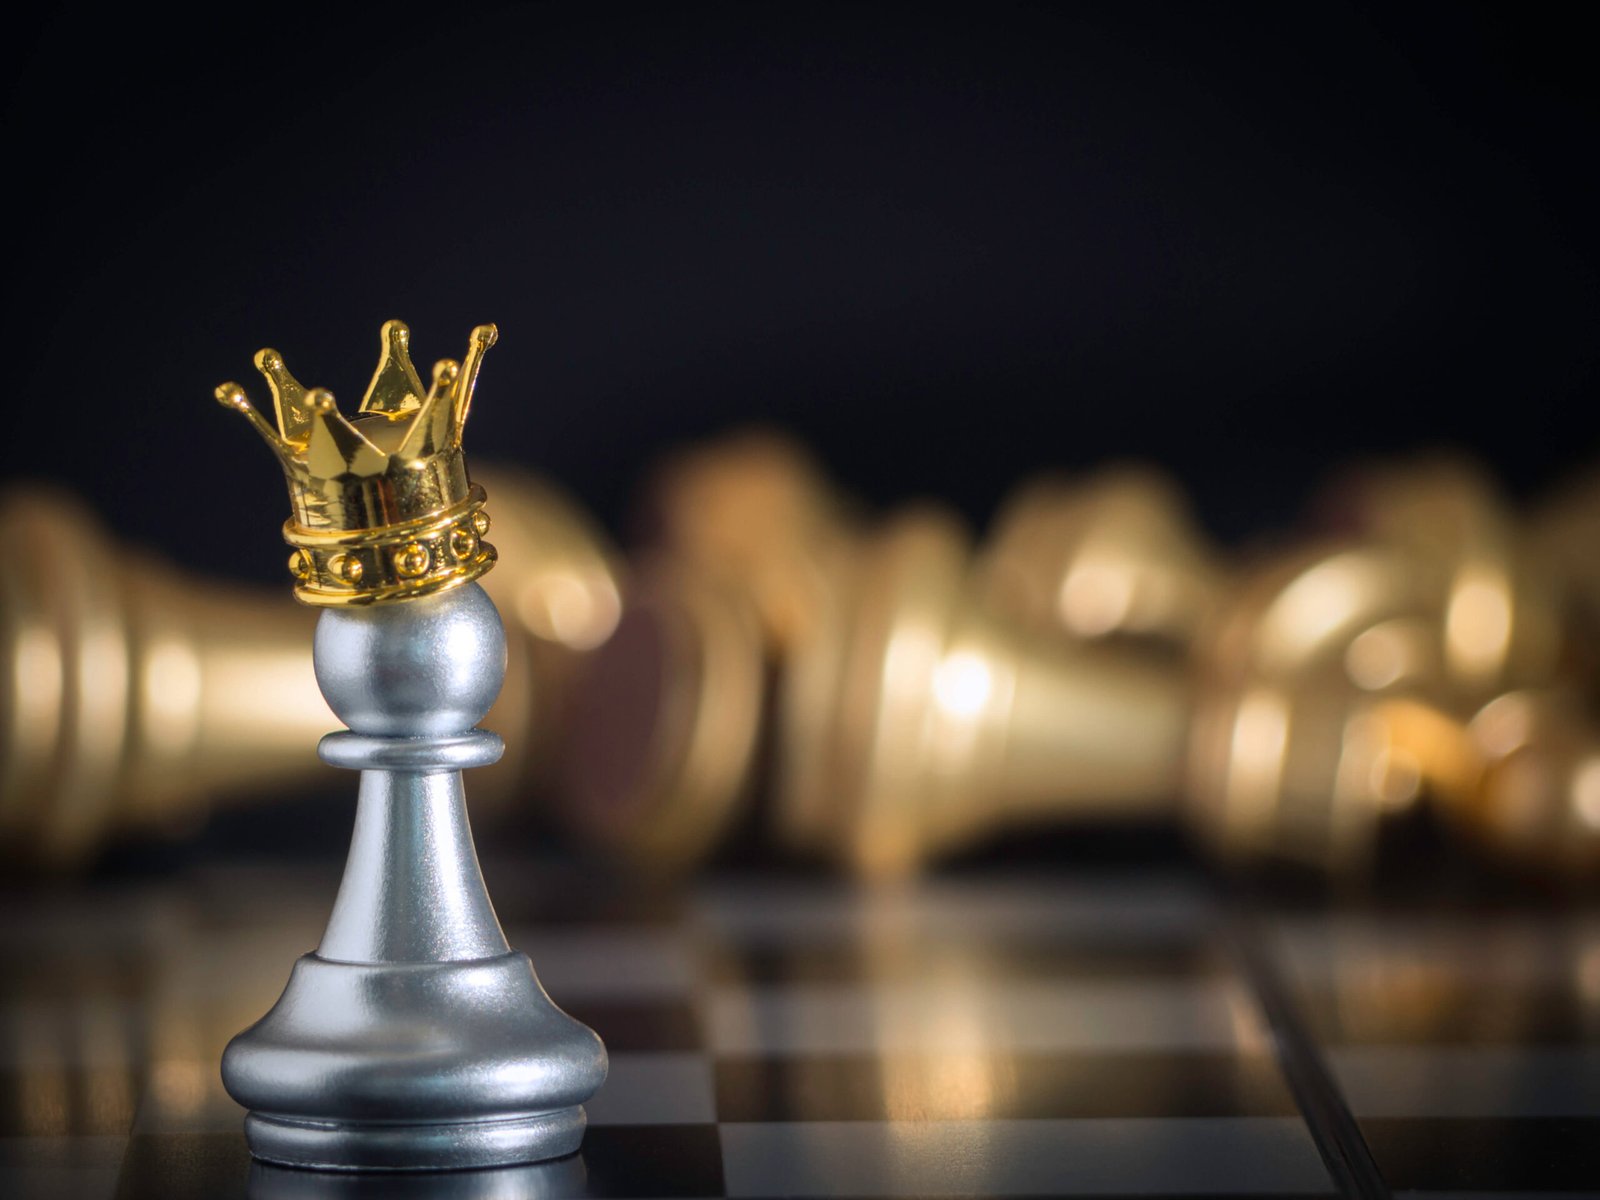 This wallpaper represents a silver pawn with golden crown standing on the chessboard.